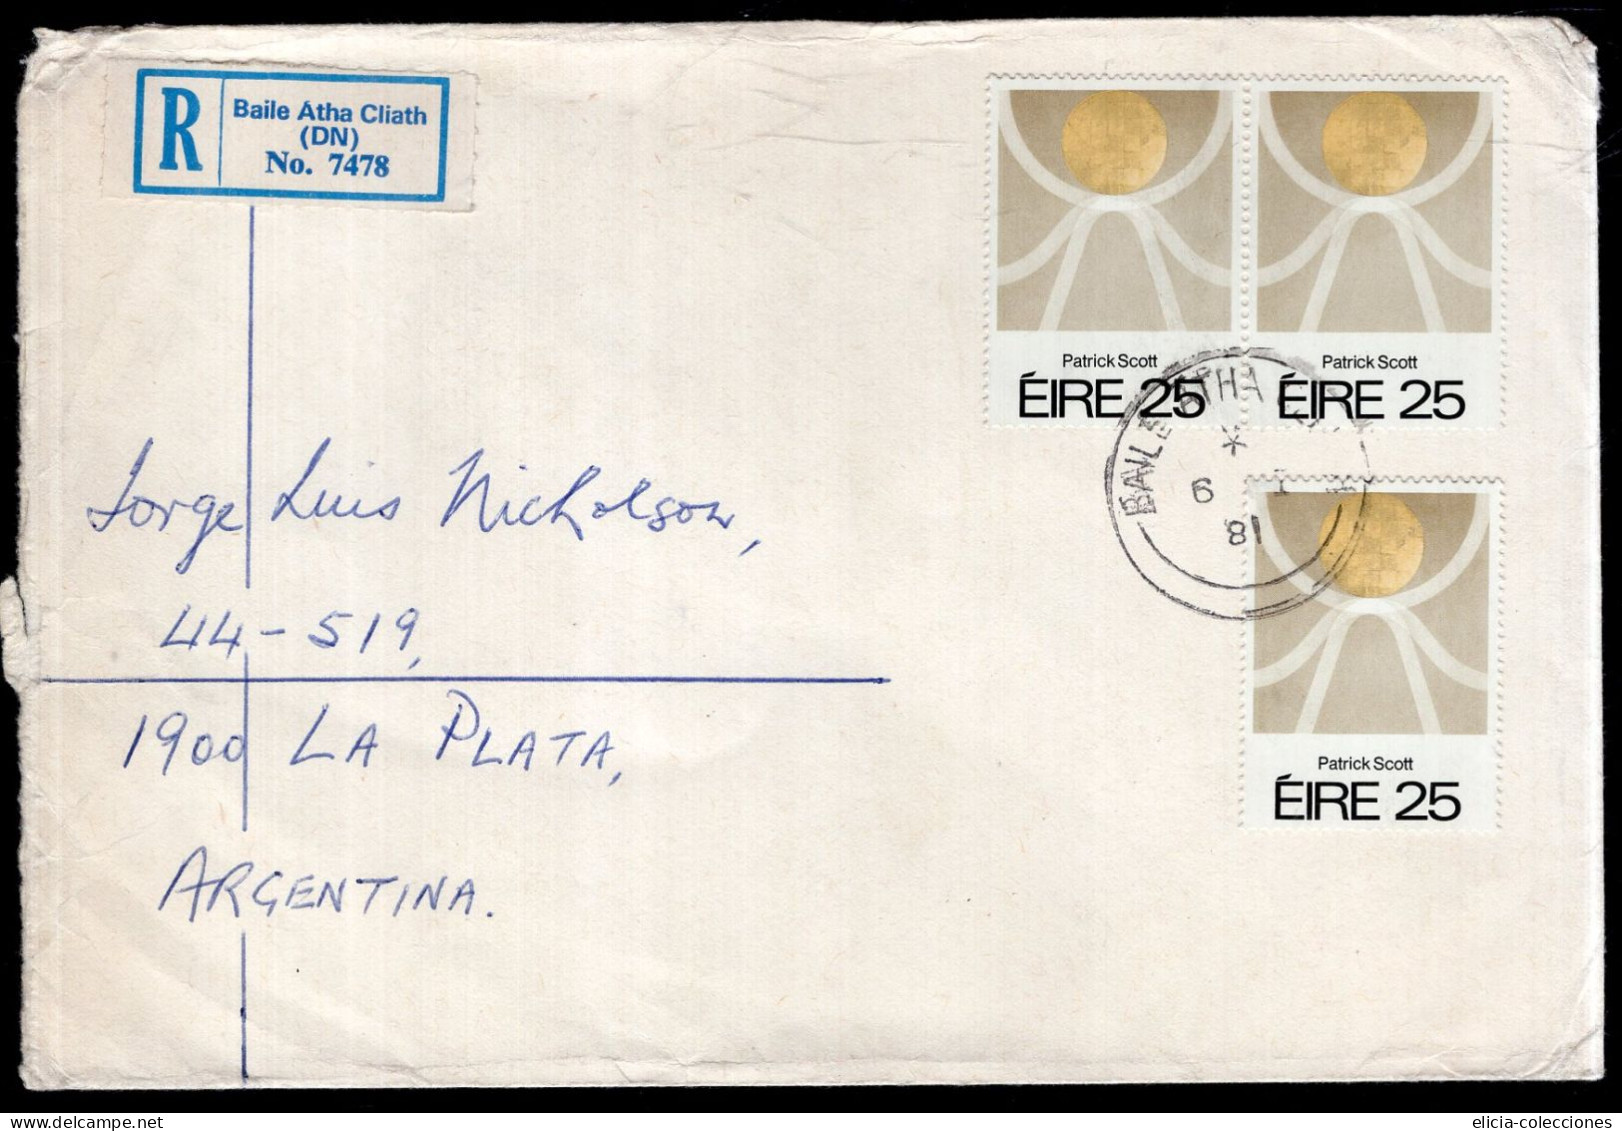 Ireland - 1981 - Letter - Sent From Dublin To Argentina - Caja 30 - Covers & Documents